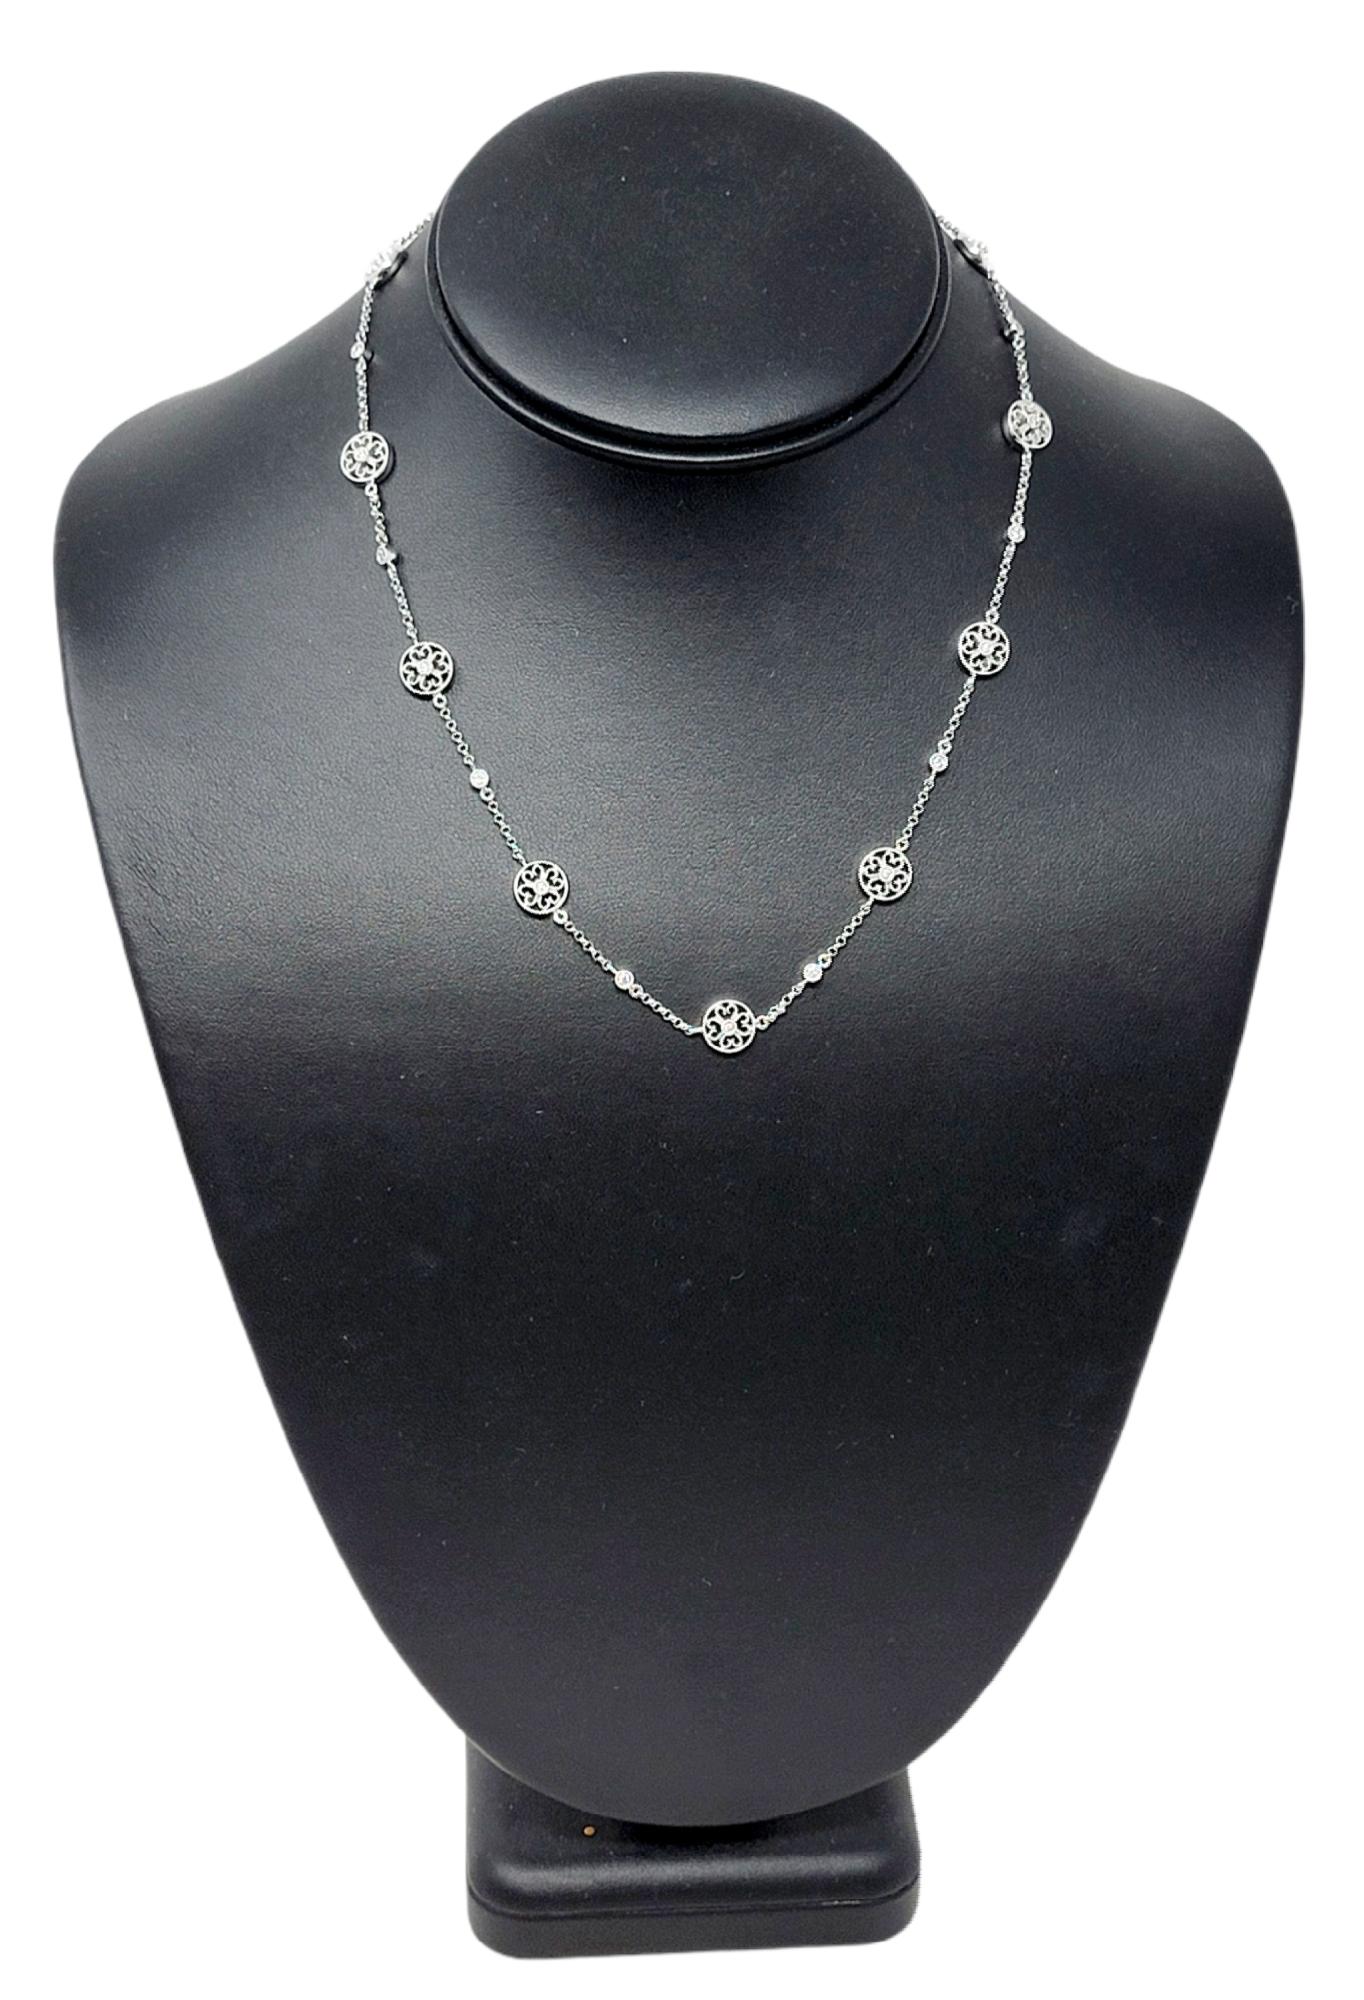 This gorgeous diamond station necklace is the perfect blend of simplicity and elegance.  Featuring a delicate chain and a sparkling floral motif, this lovely necklace goes with just about everything. This beautiful piece features 11 diamond